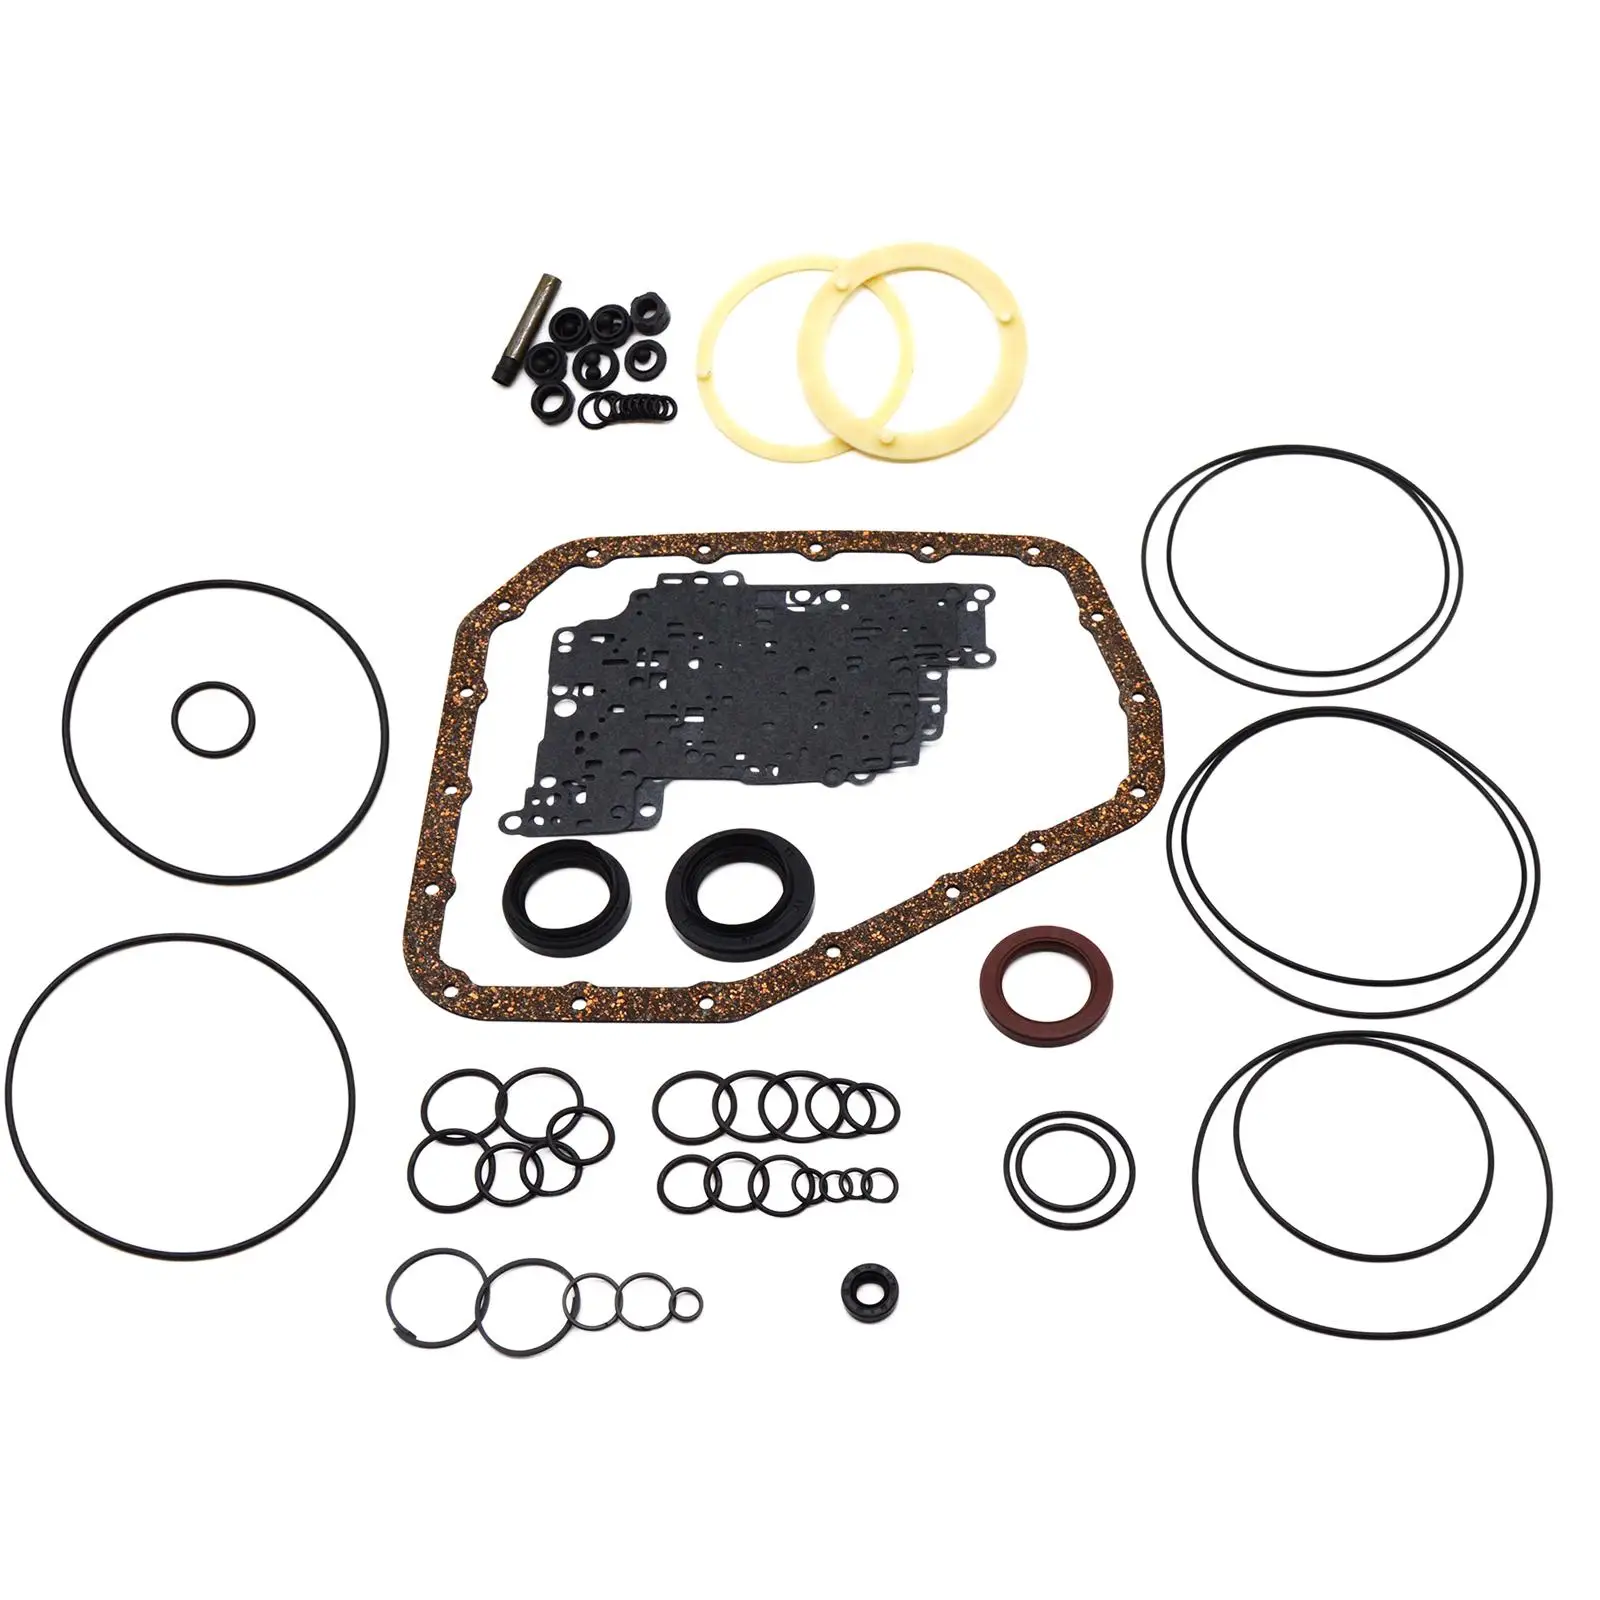 Automatic Transmission Repair Kit Overhaul 81-40LE 137002A Transmission Rebuild Kit for Buick Excelle 1.6 Cushion Rubber